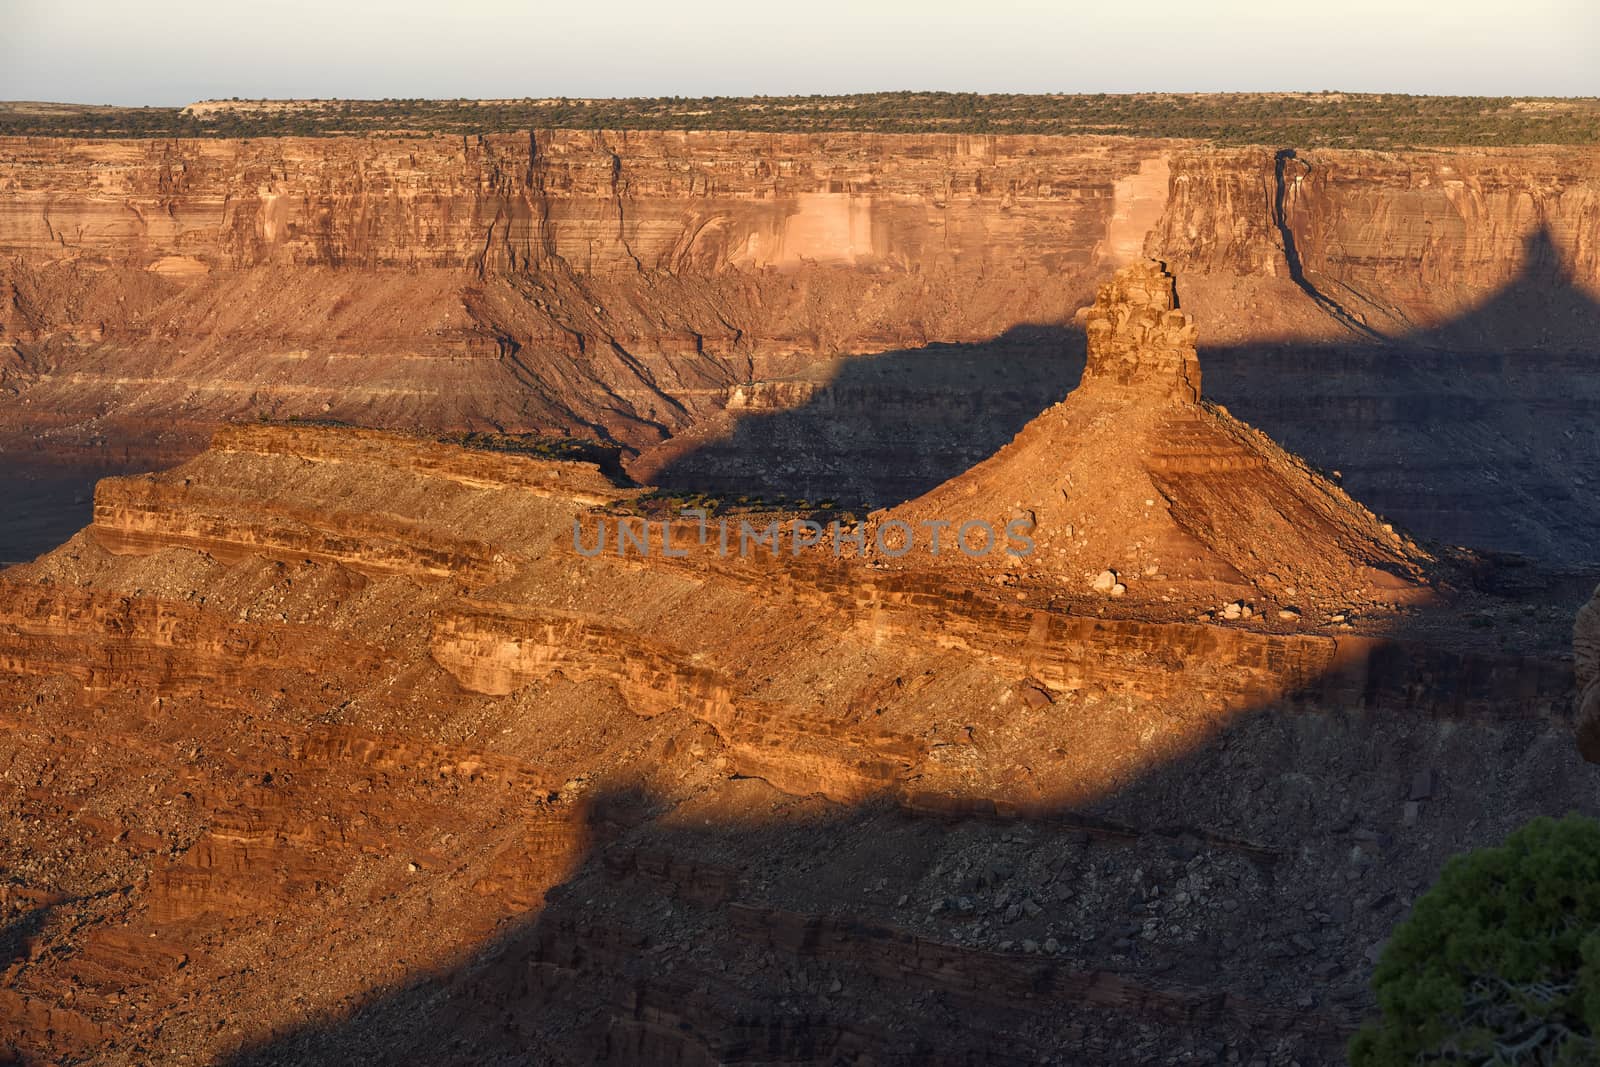 Warm sunset light on the cliffs of Dead Horse Point State Park, Utah.